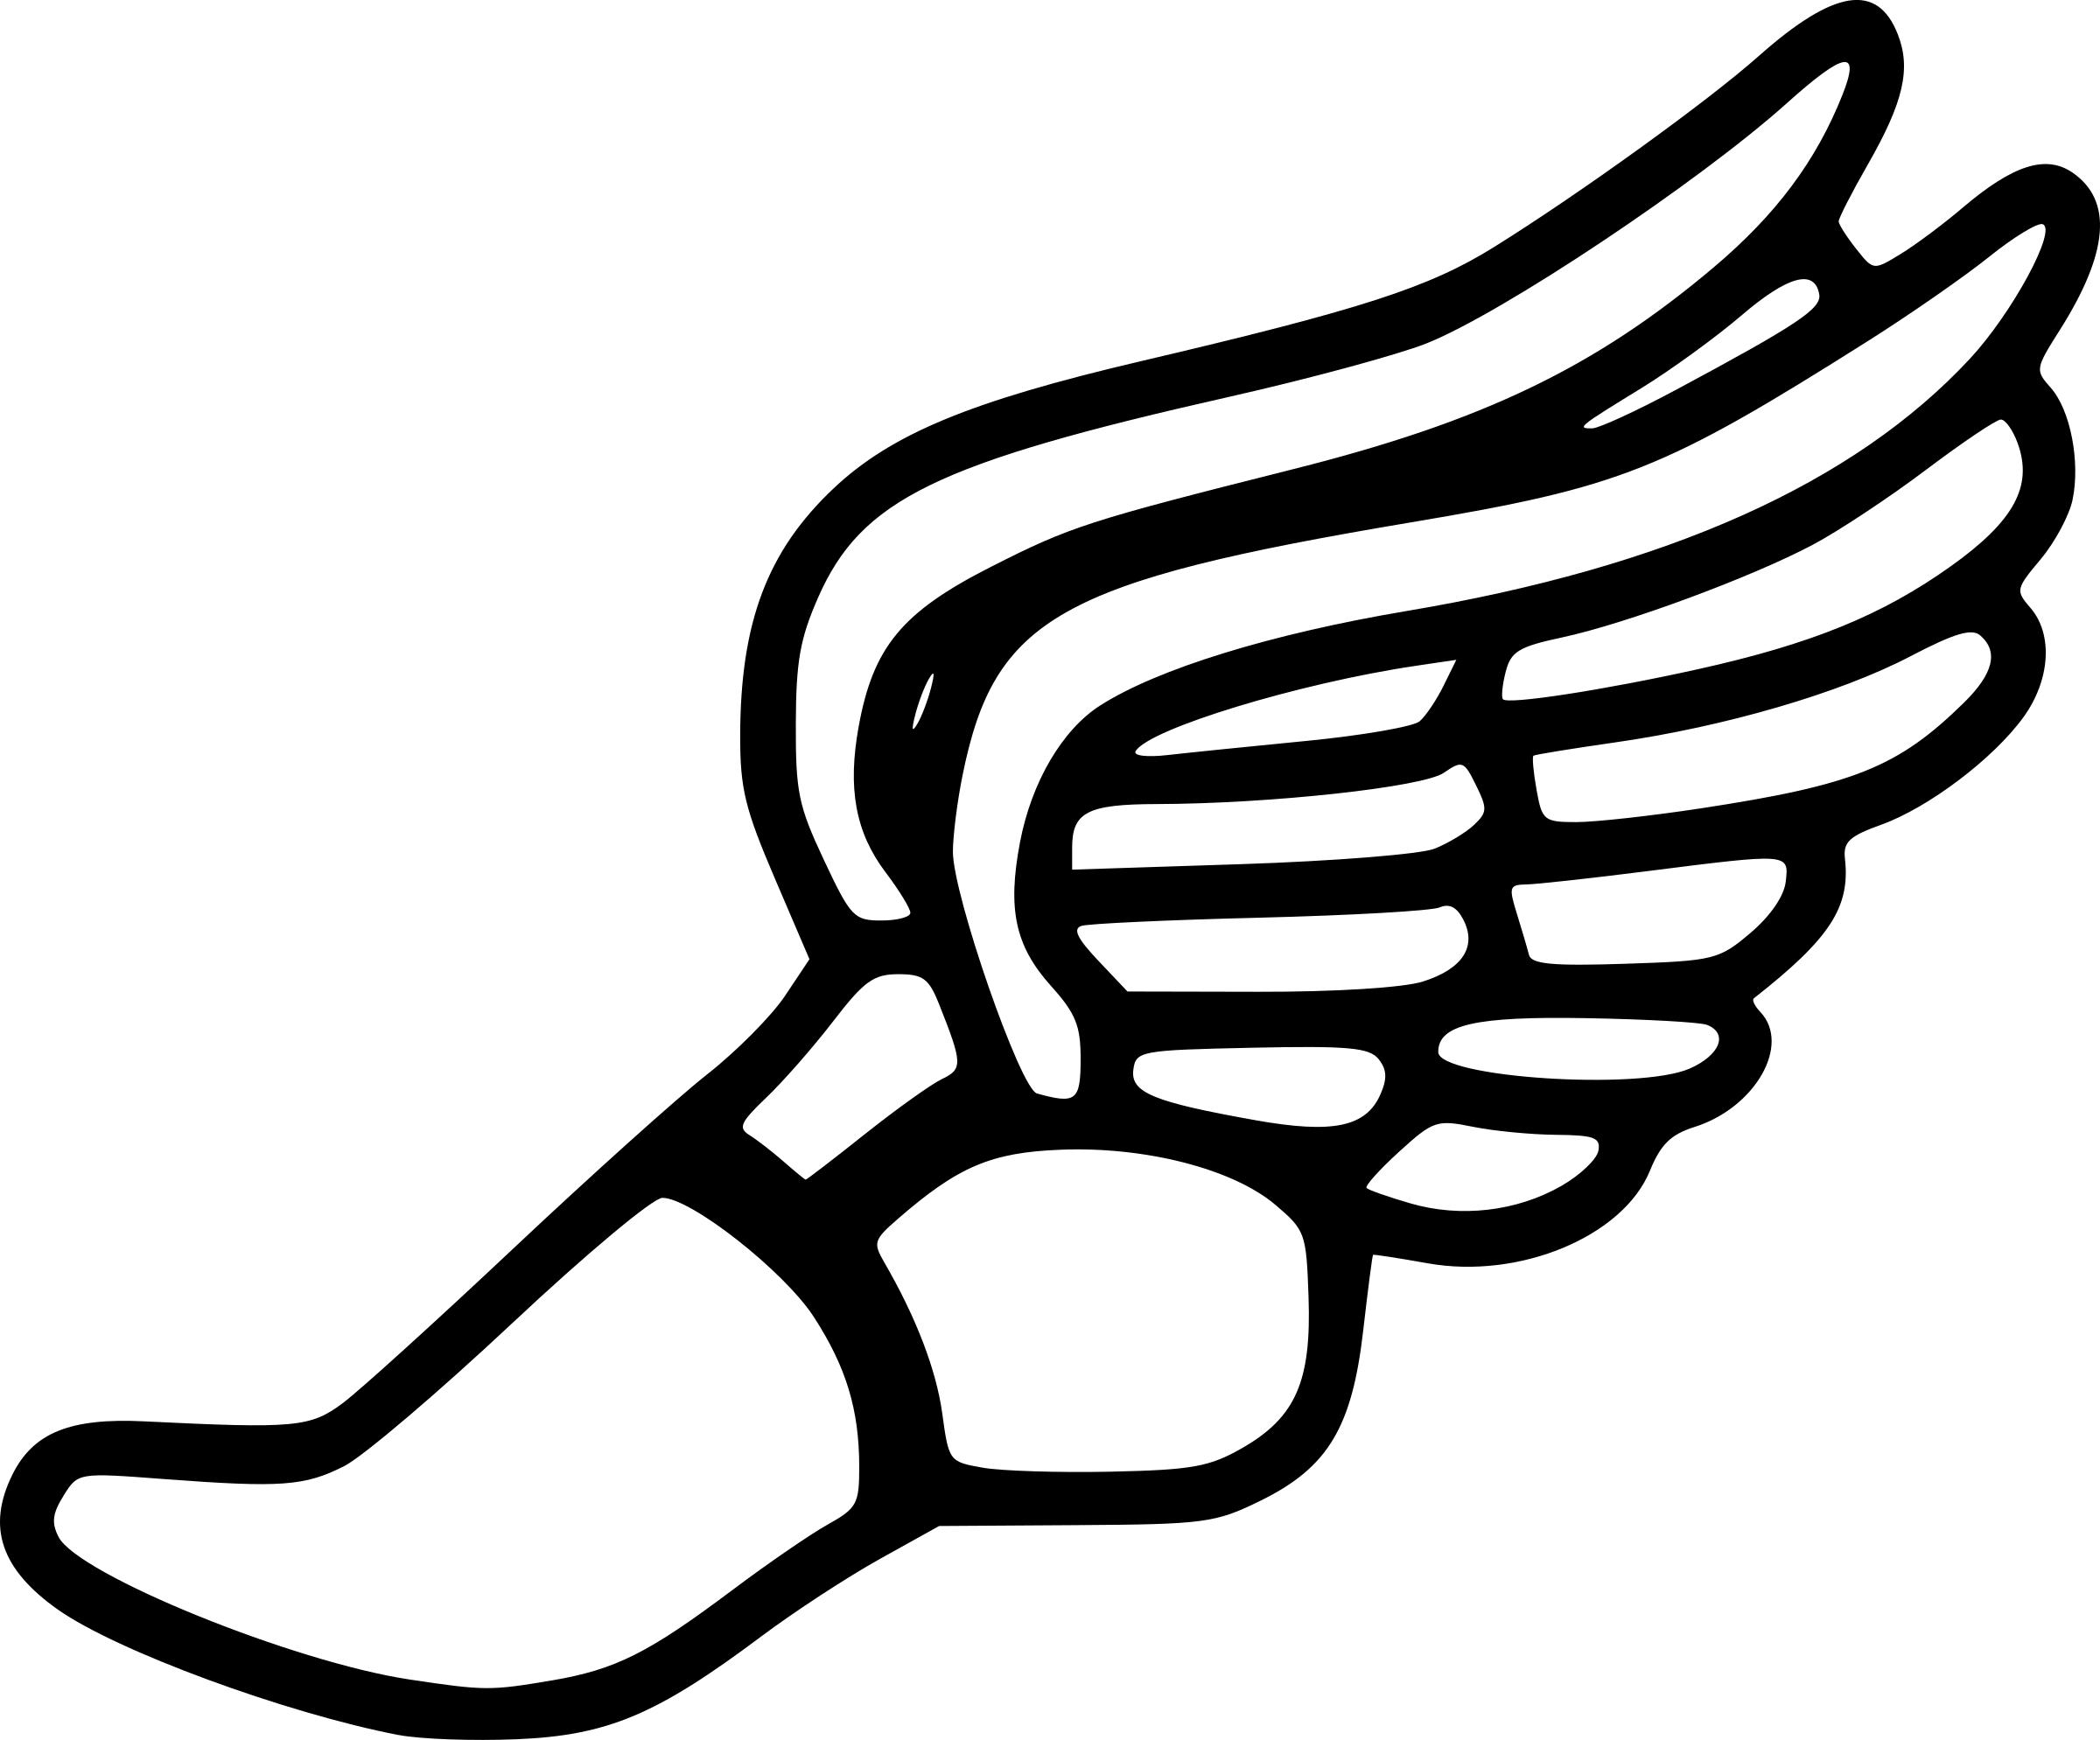 Winged foot PNG icons